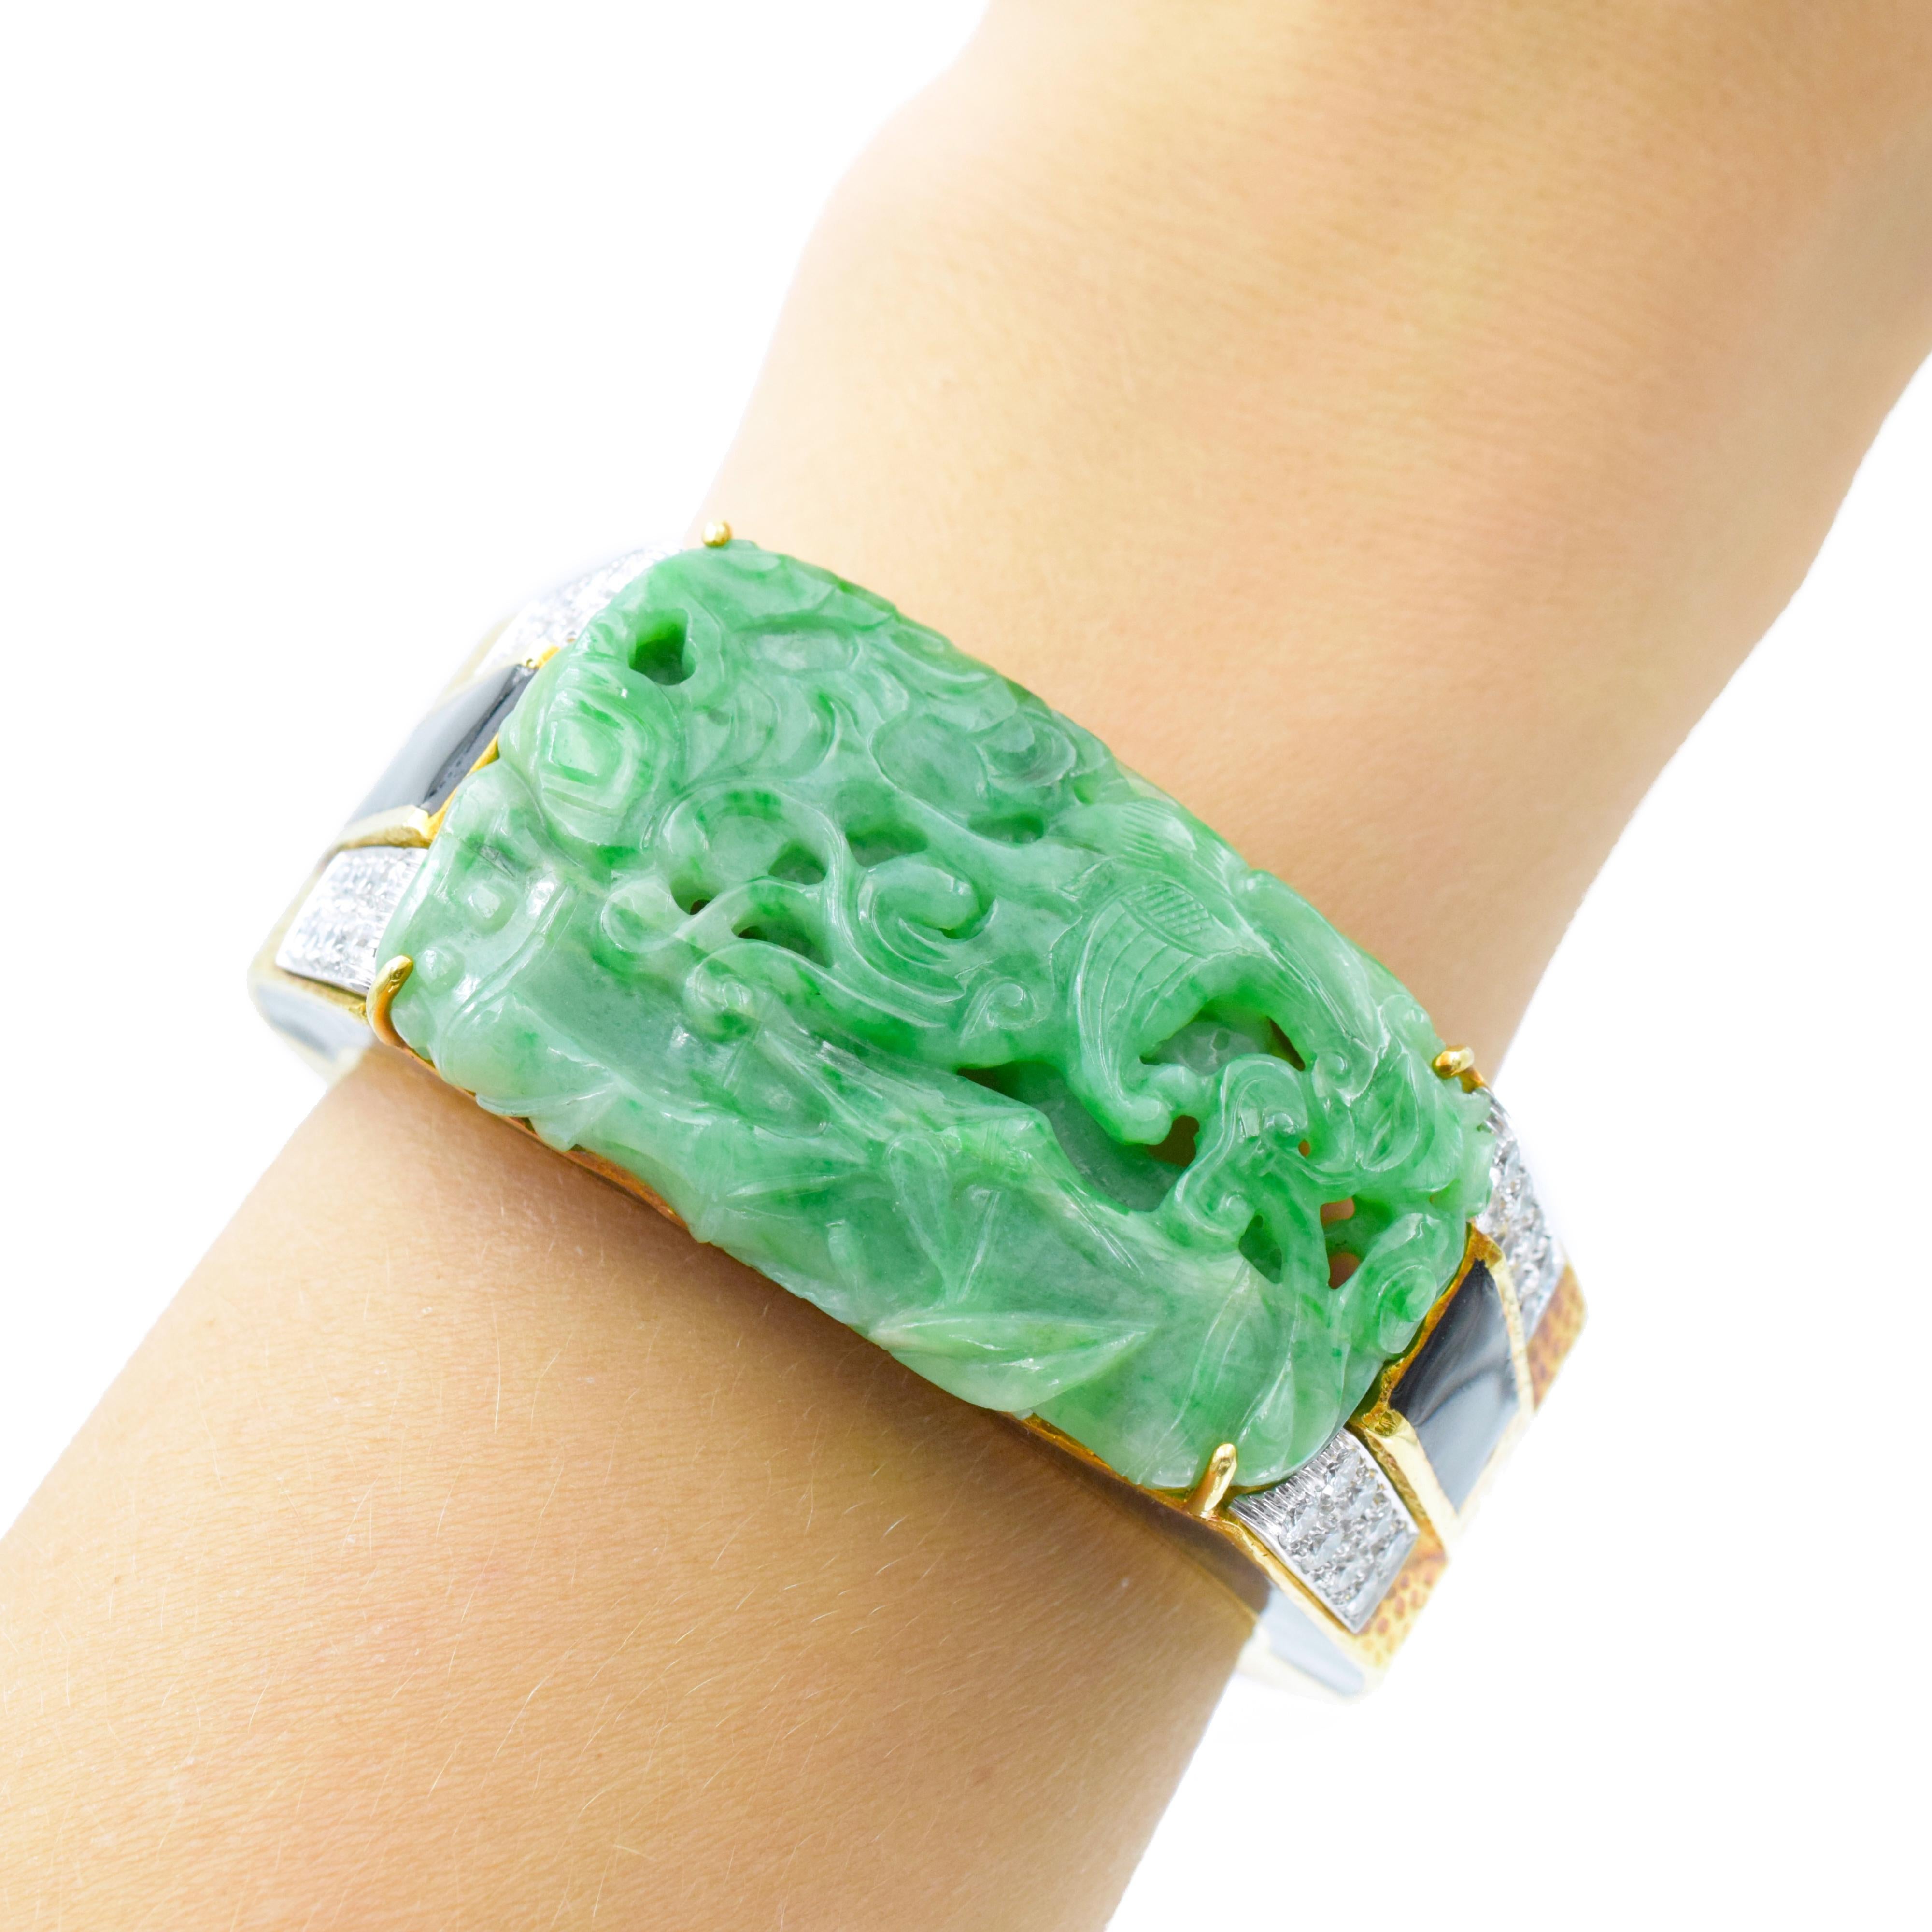 David Webb Carved Jade, Black Enamel and Diamond Cuff Bangle Bracelet In 18k yellow gold and platinum. This tapered hammered gold bangle centering a modified rectangular carved jade panel depicting a phoenix within bamboo measures approximately 52.0